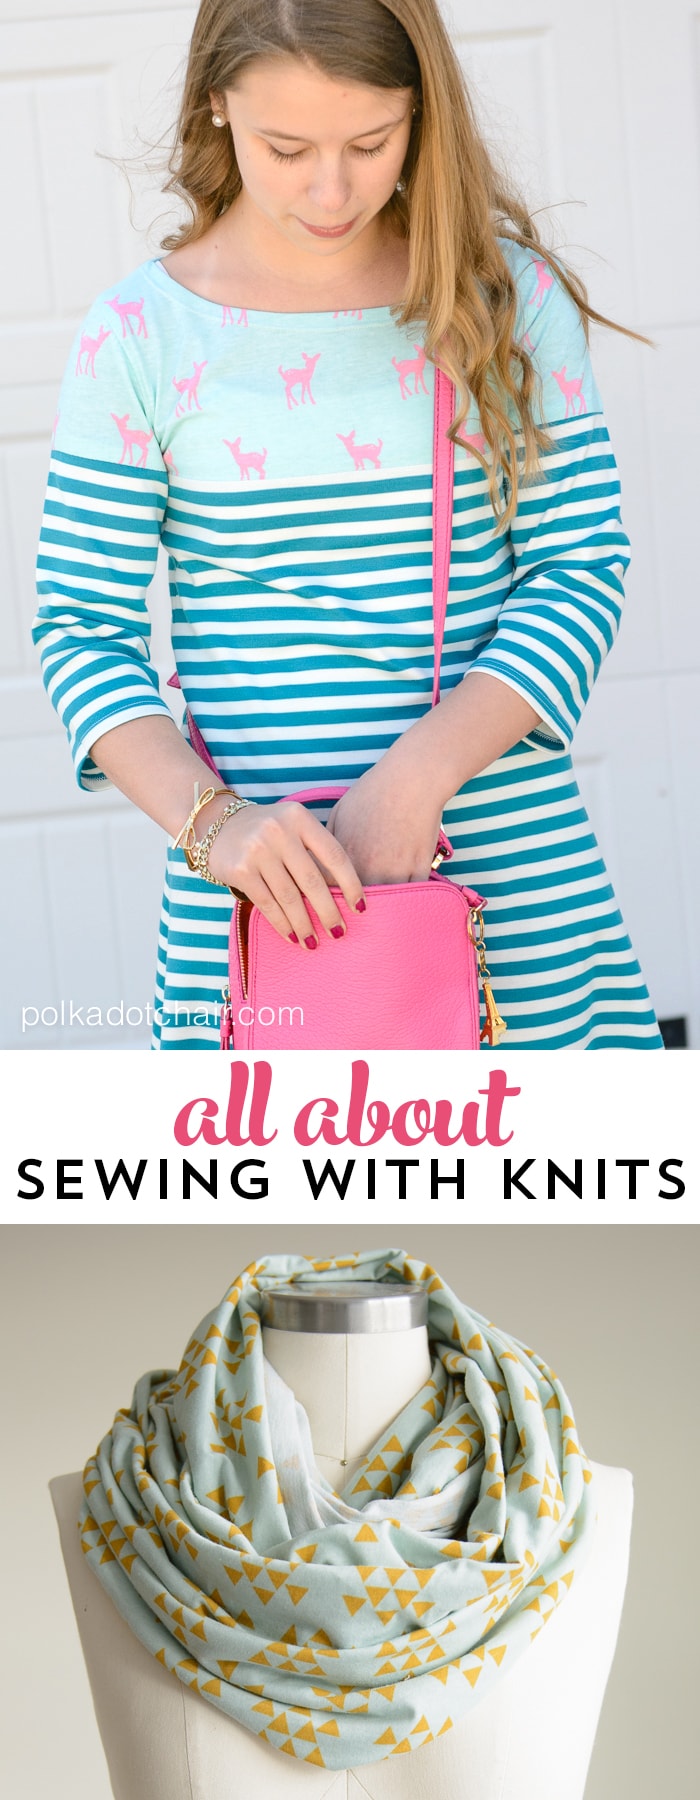 5 project to try out when sewing with knit fabrics, along with knit sewing tips and techniques 